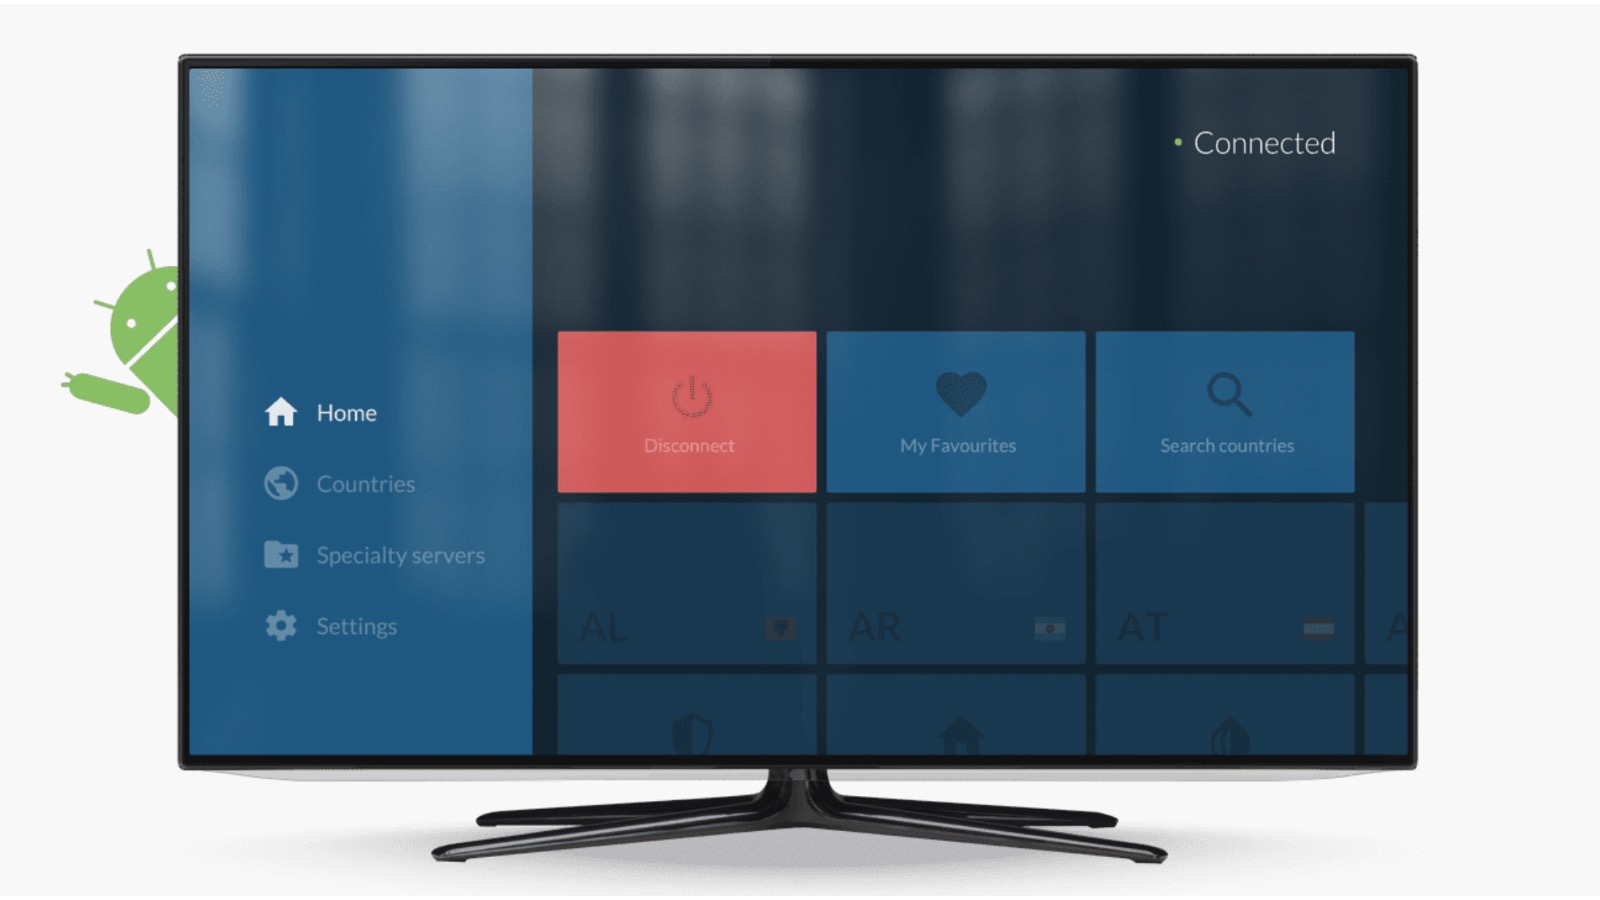 NordVPN Launches Android TV App